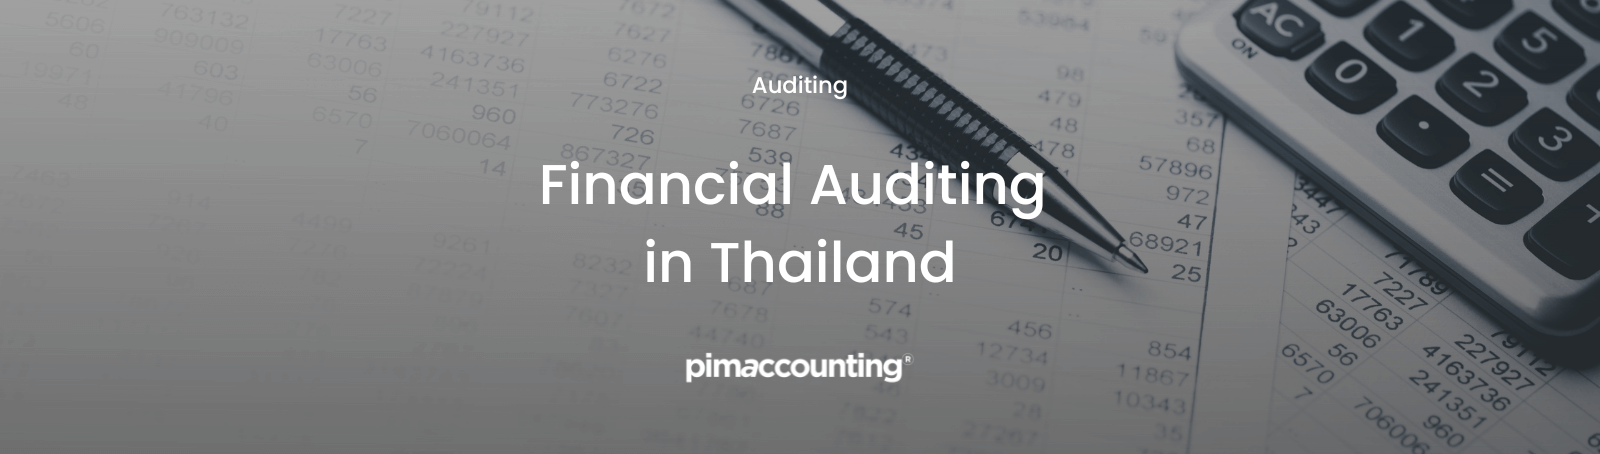 Financial Auditing in Thailand